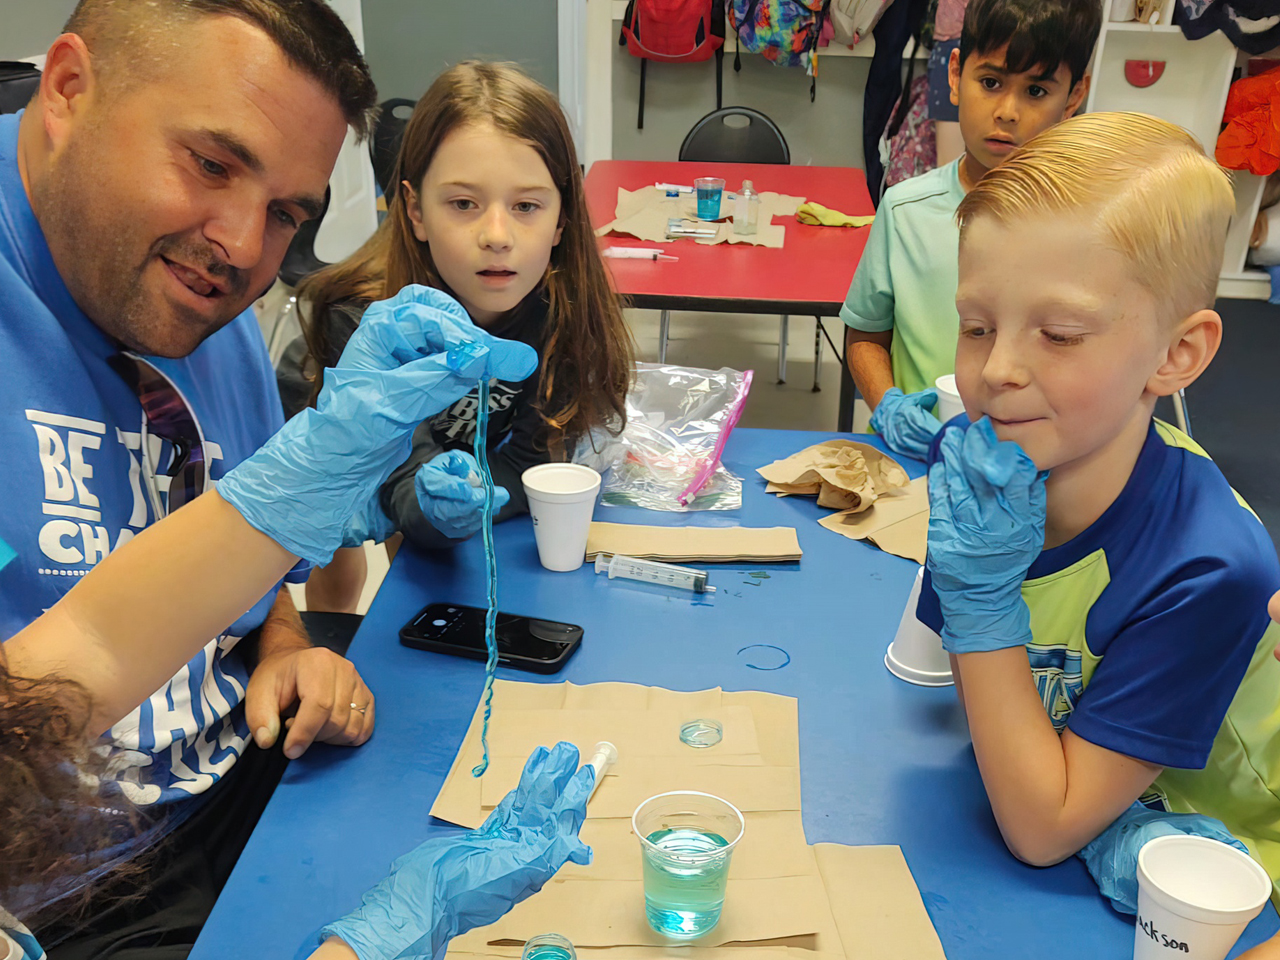 Science, Tech, Math, & Other Centers Build Practical Skills